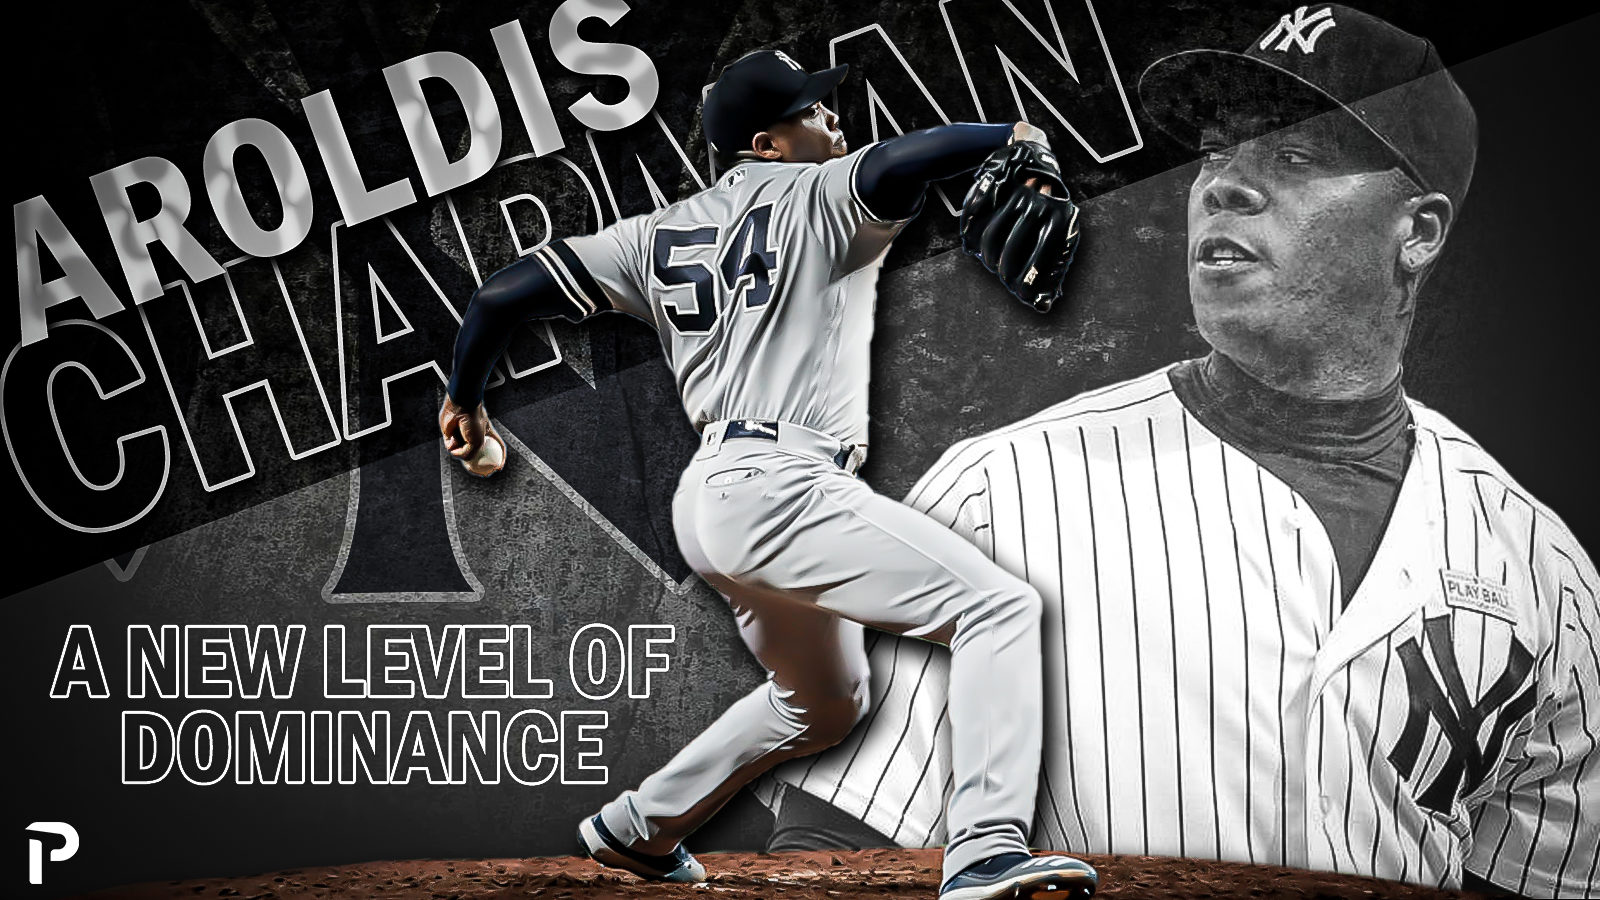 A New Level of Dominance for Aroldis Chapman